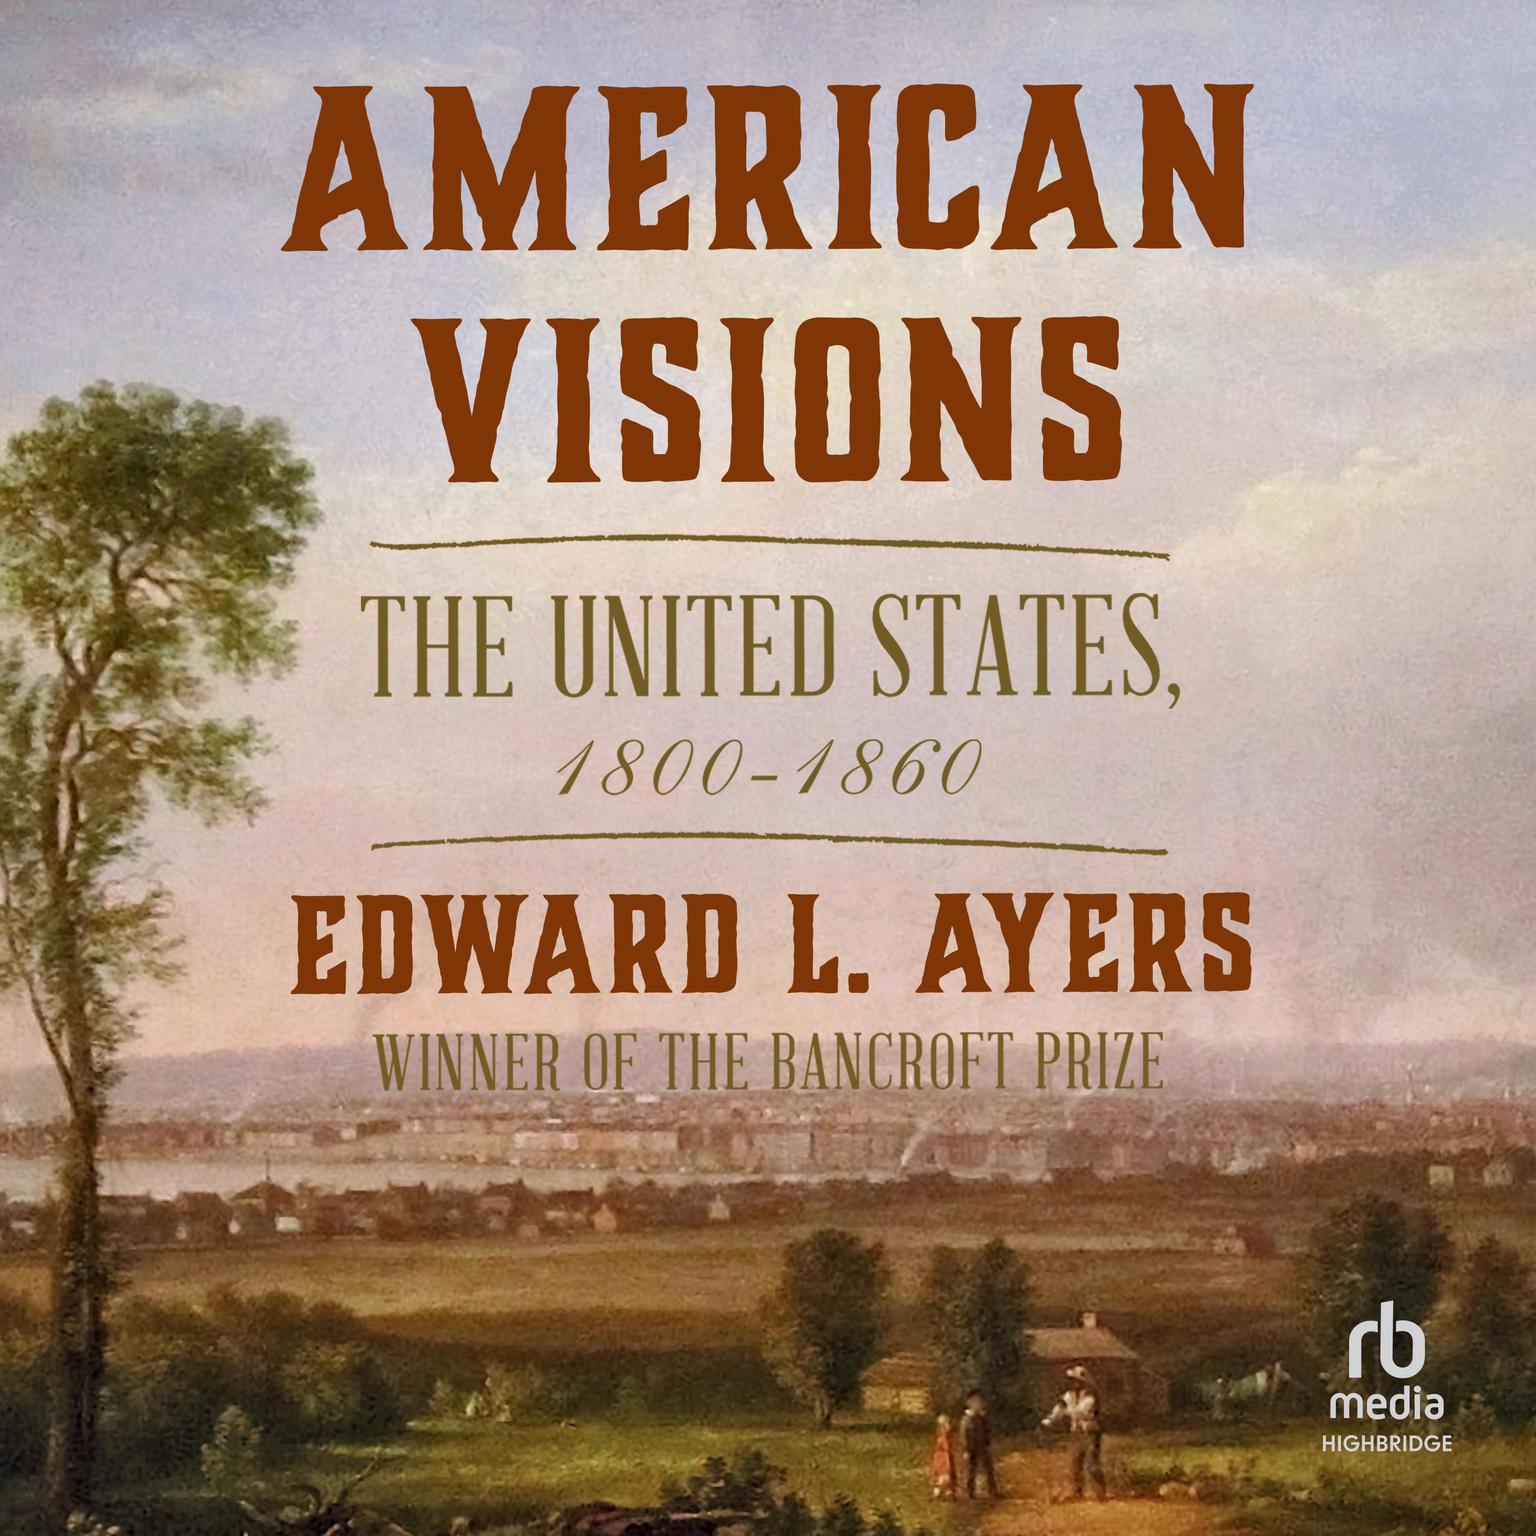 American Visions: The United States 1800-1860 Audiobook, by Edward L. Ayers